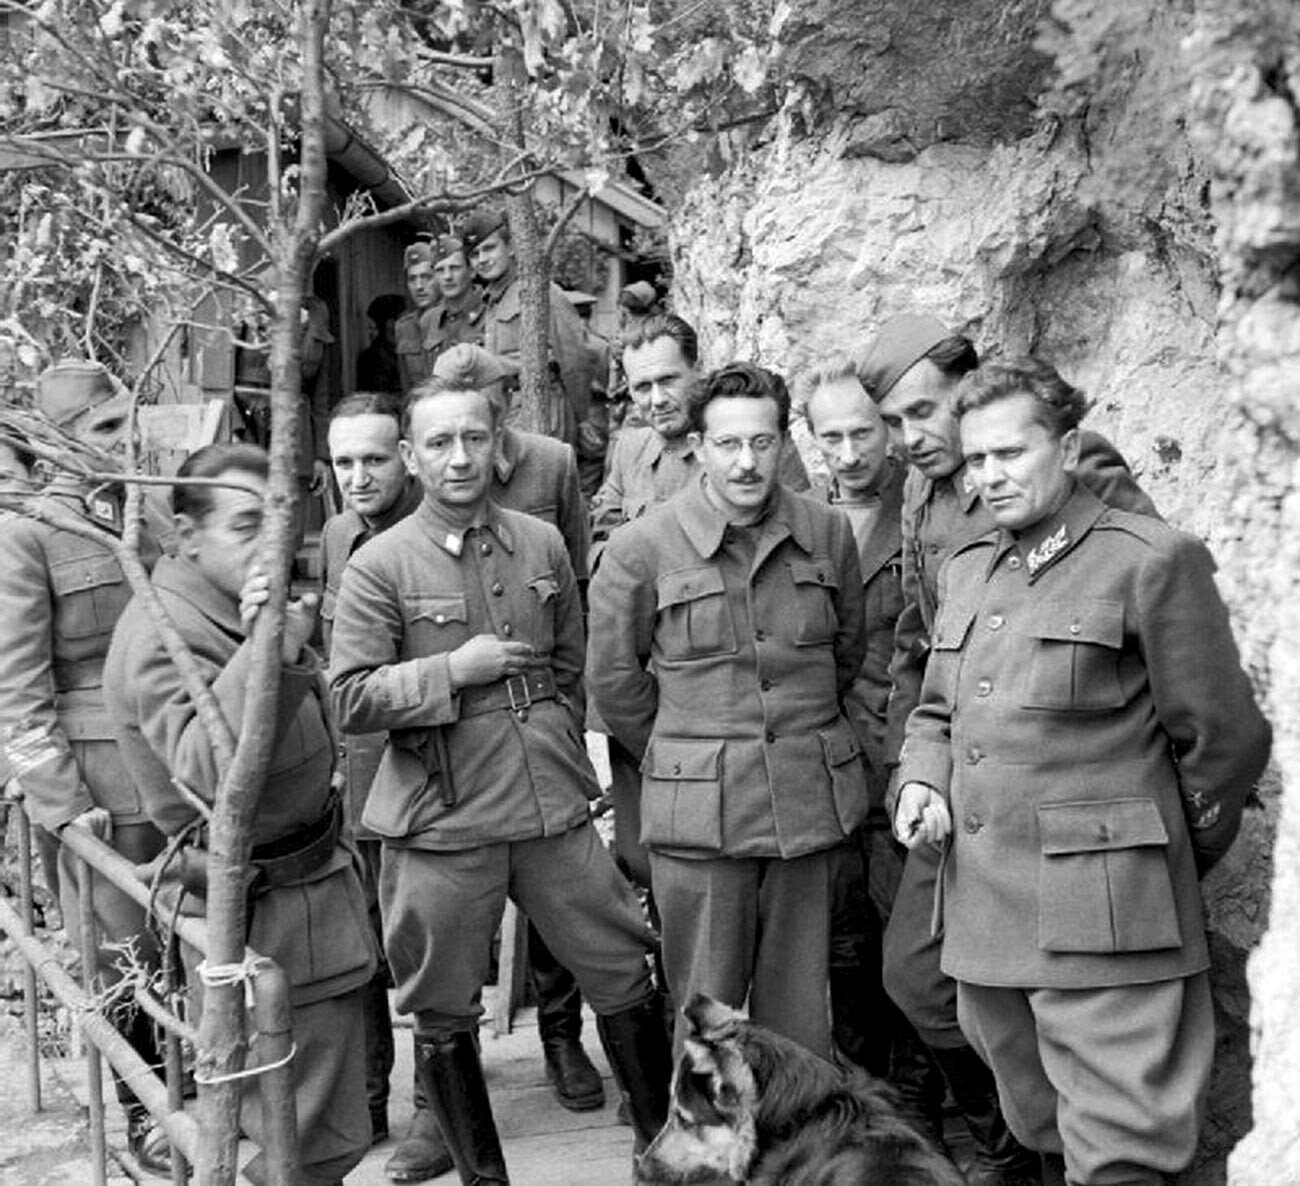 Marshal Tito stands with his Cabinet Ministers and Supreme Staff at his mountain headquarters in Yugoslavia on 14 May 1944.